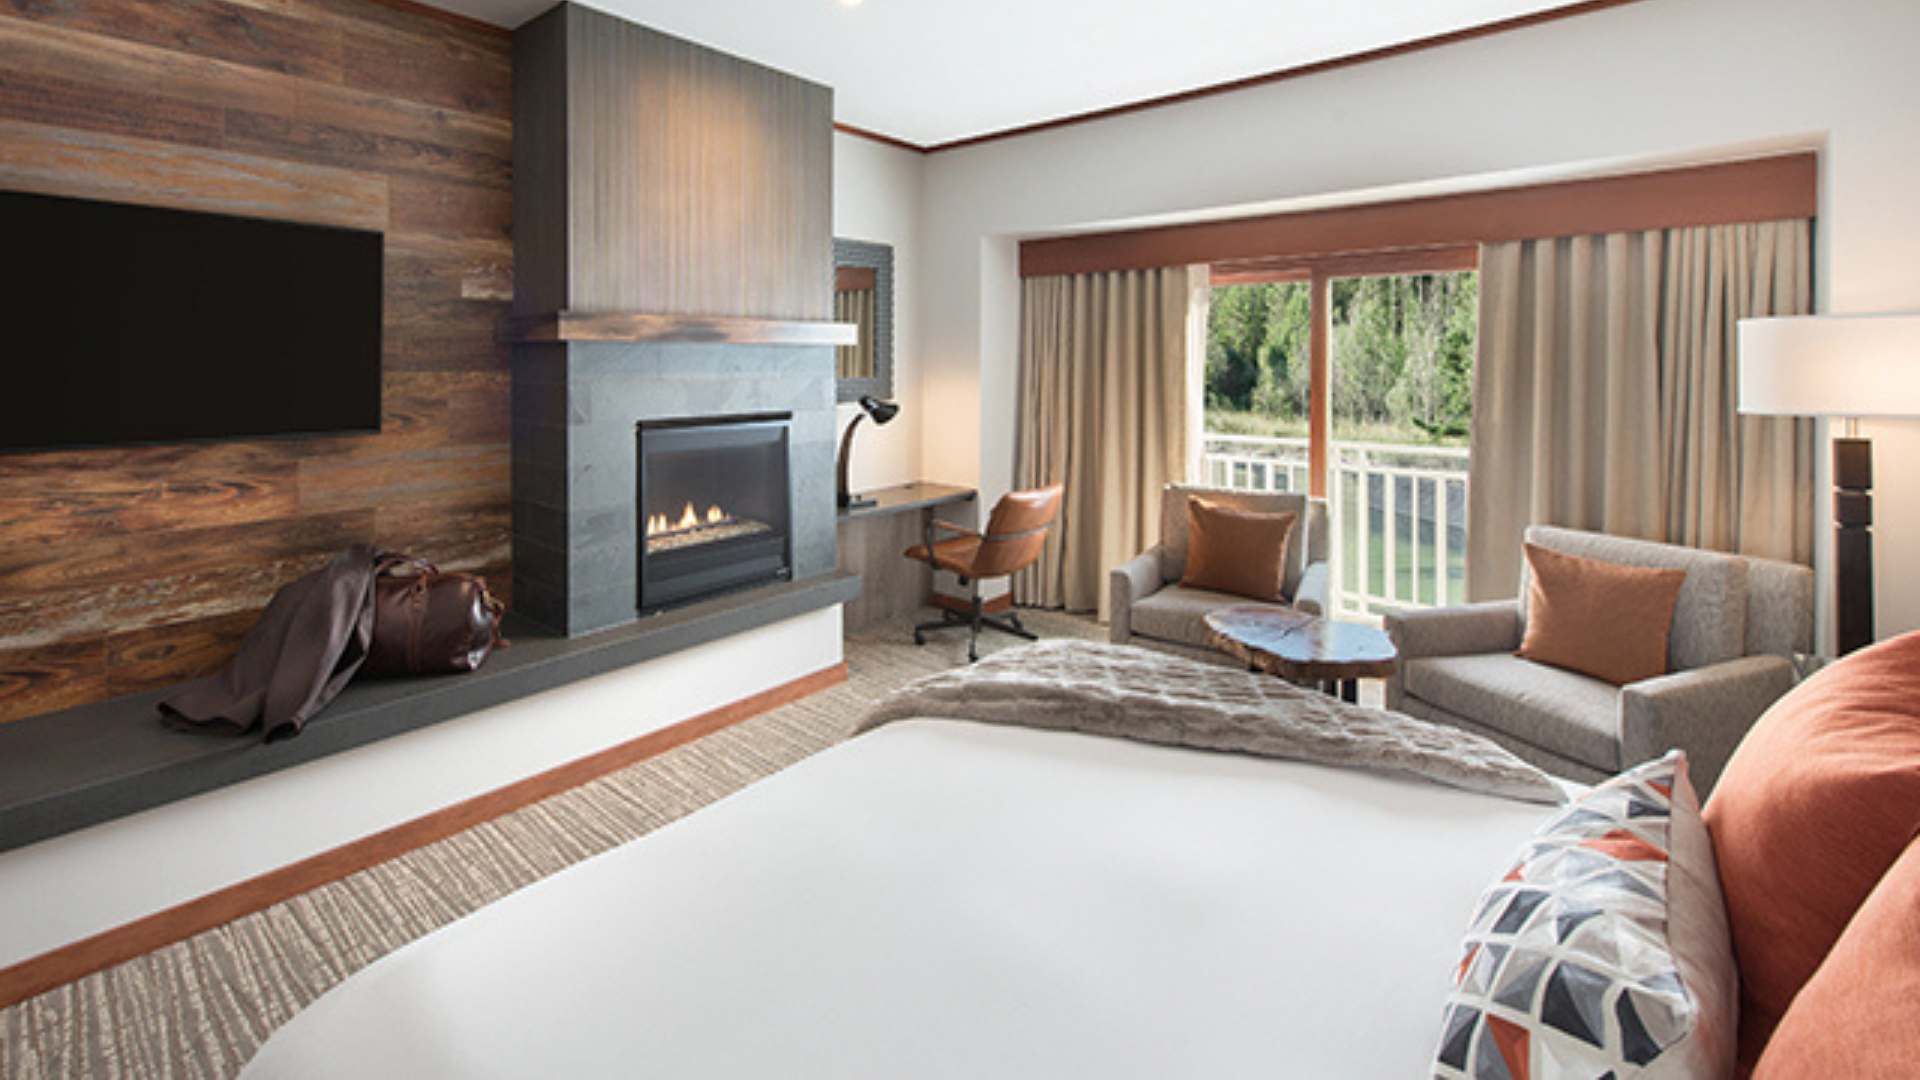 A View Of A Living Room With A Bed And A Fireplace